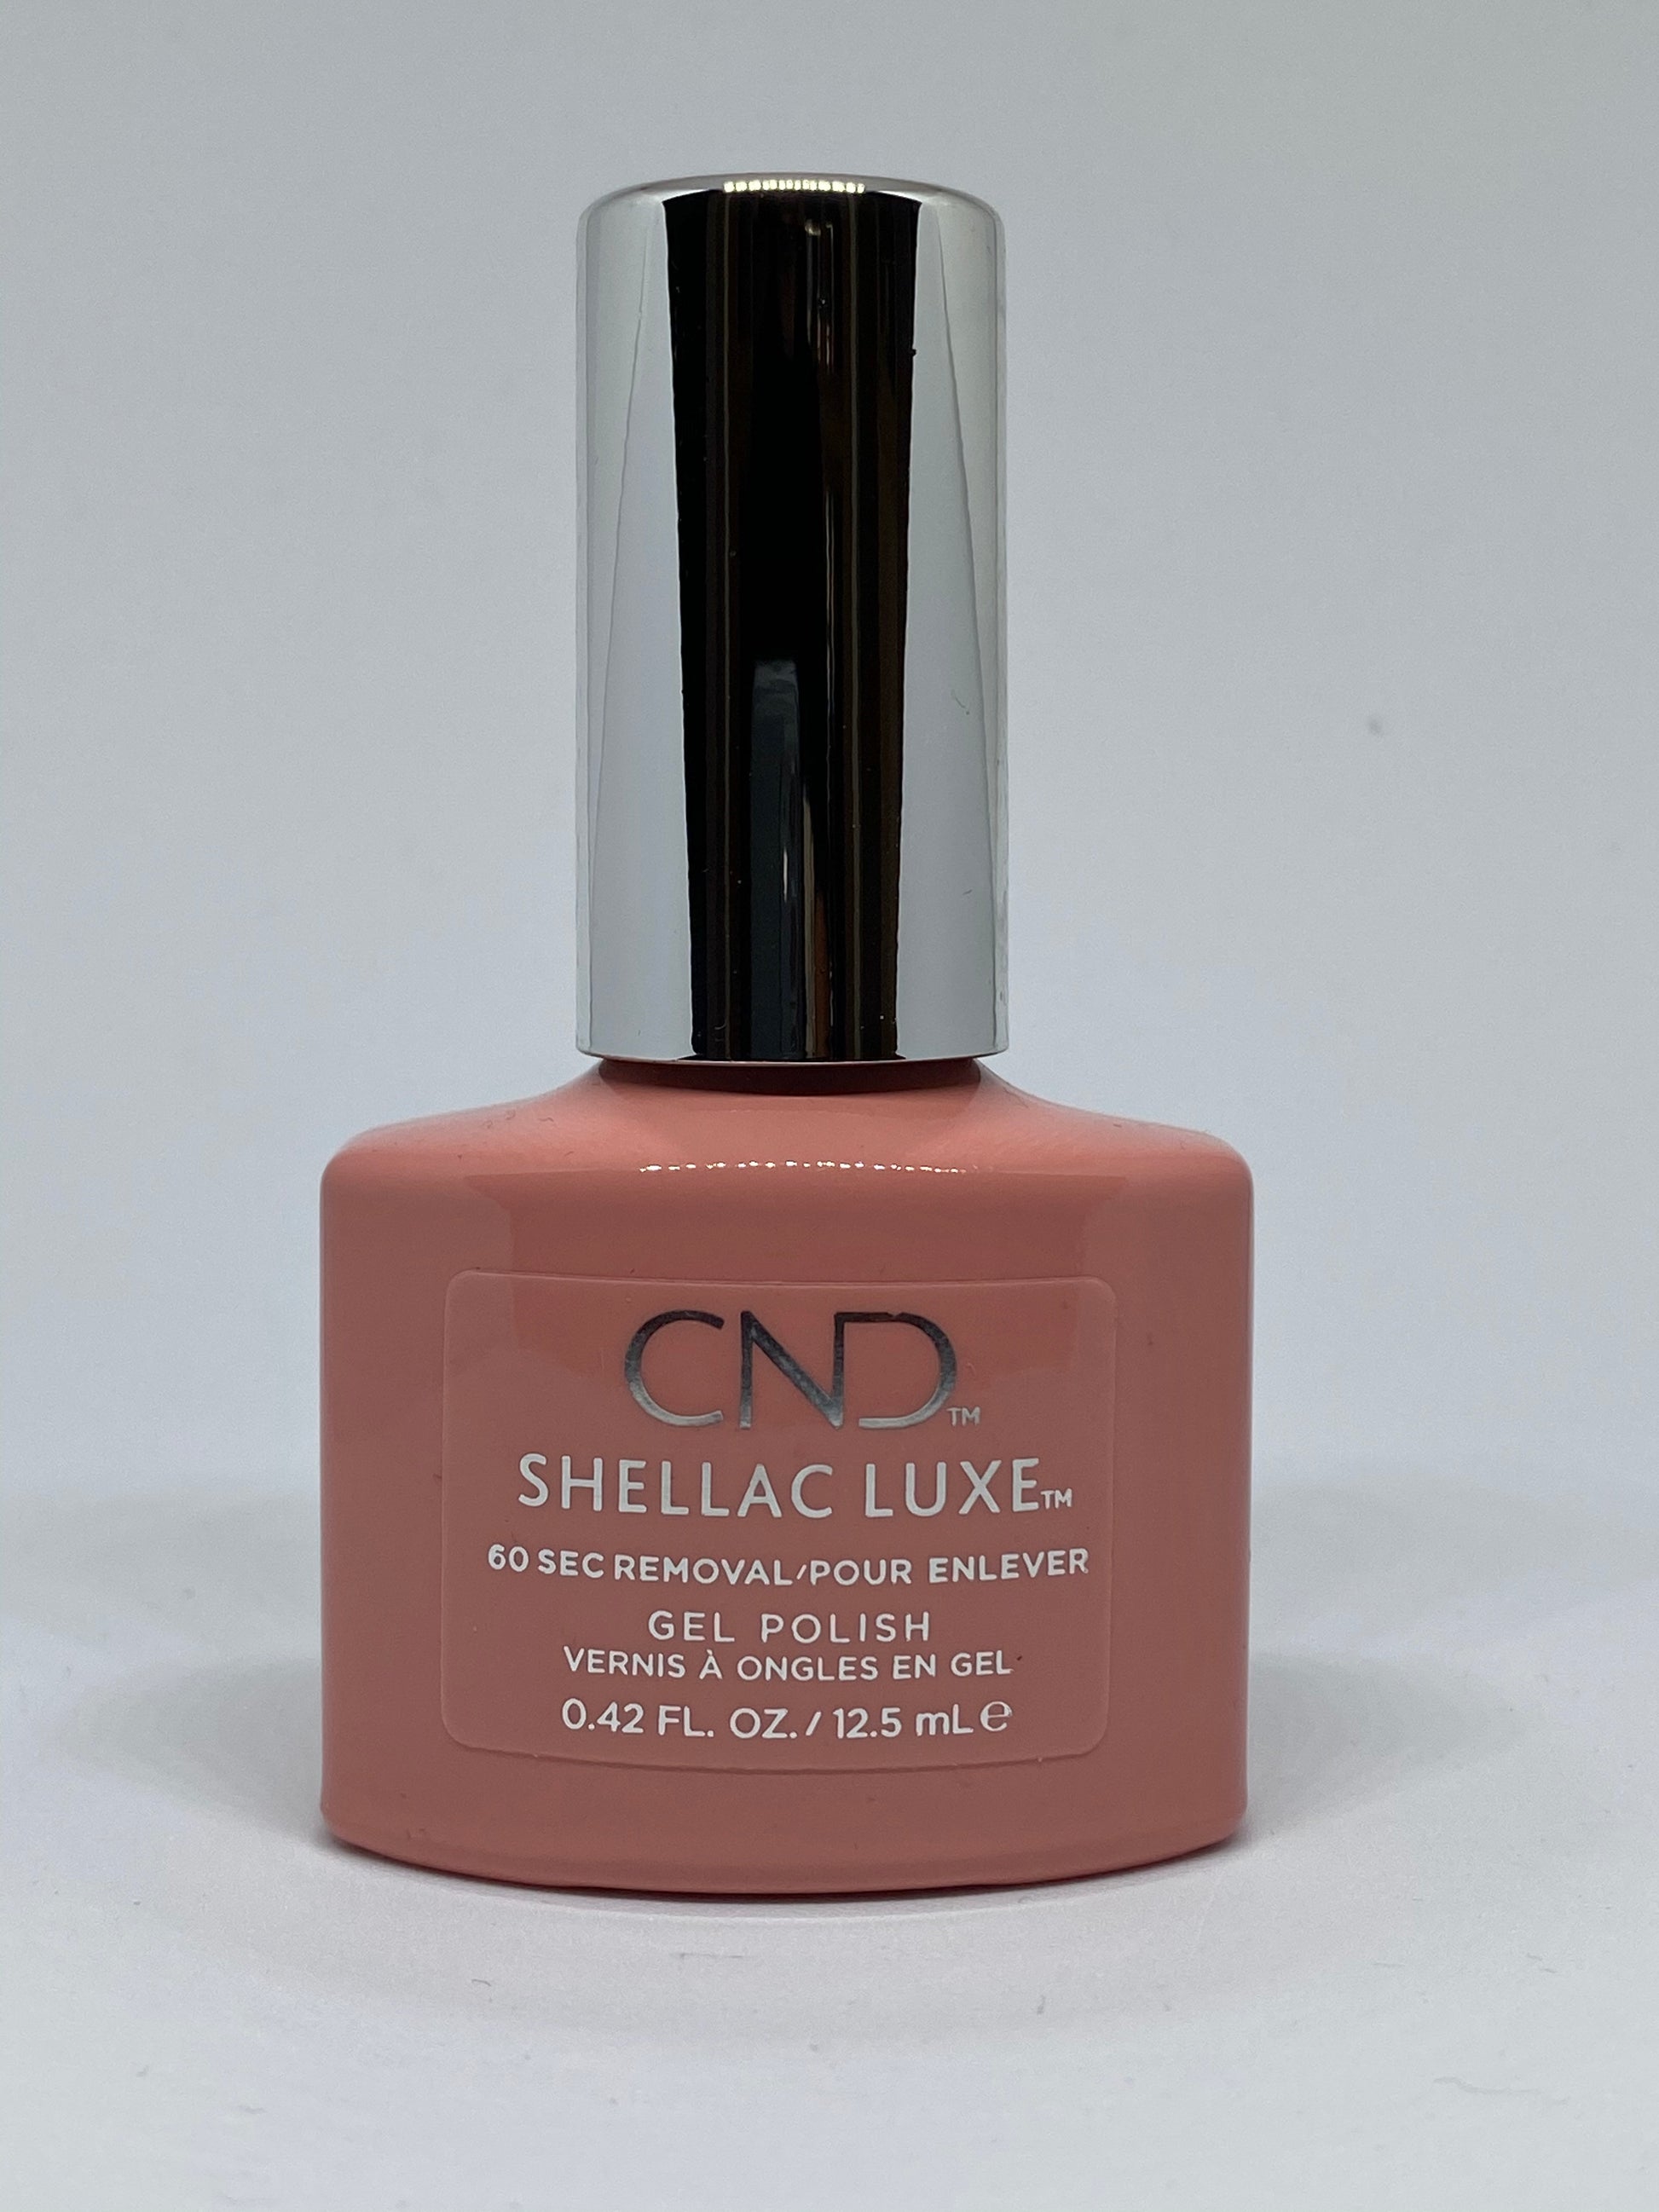 CND Shellac Luxe Gel Polish Nude Knickers #263-BeautyNmakeup.co.uk